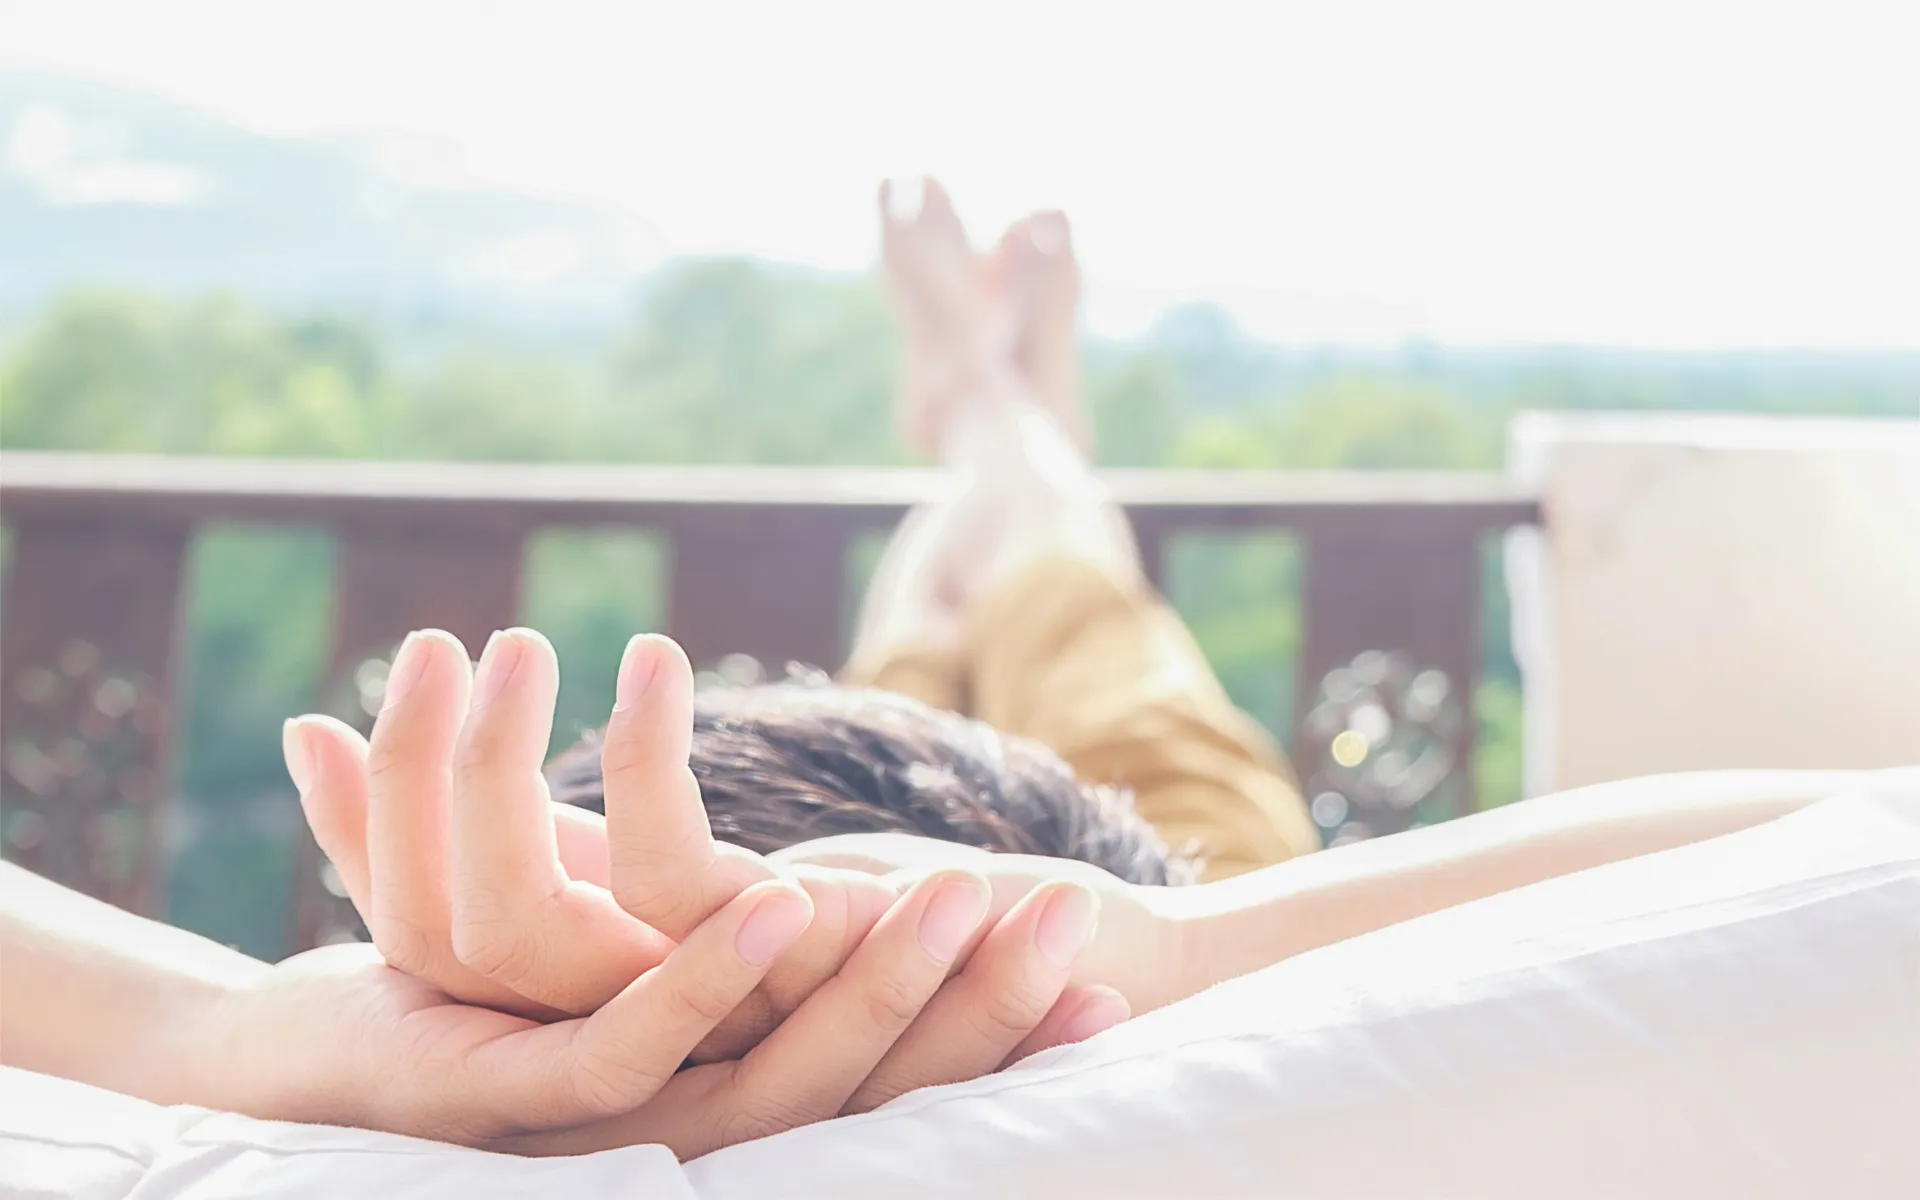 15 Proven Ways to Relax and Destress After a Hard Day